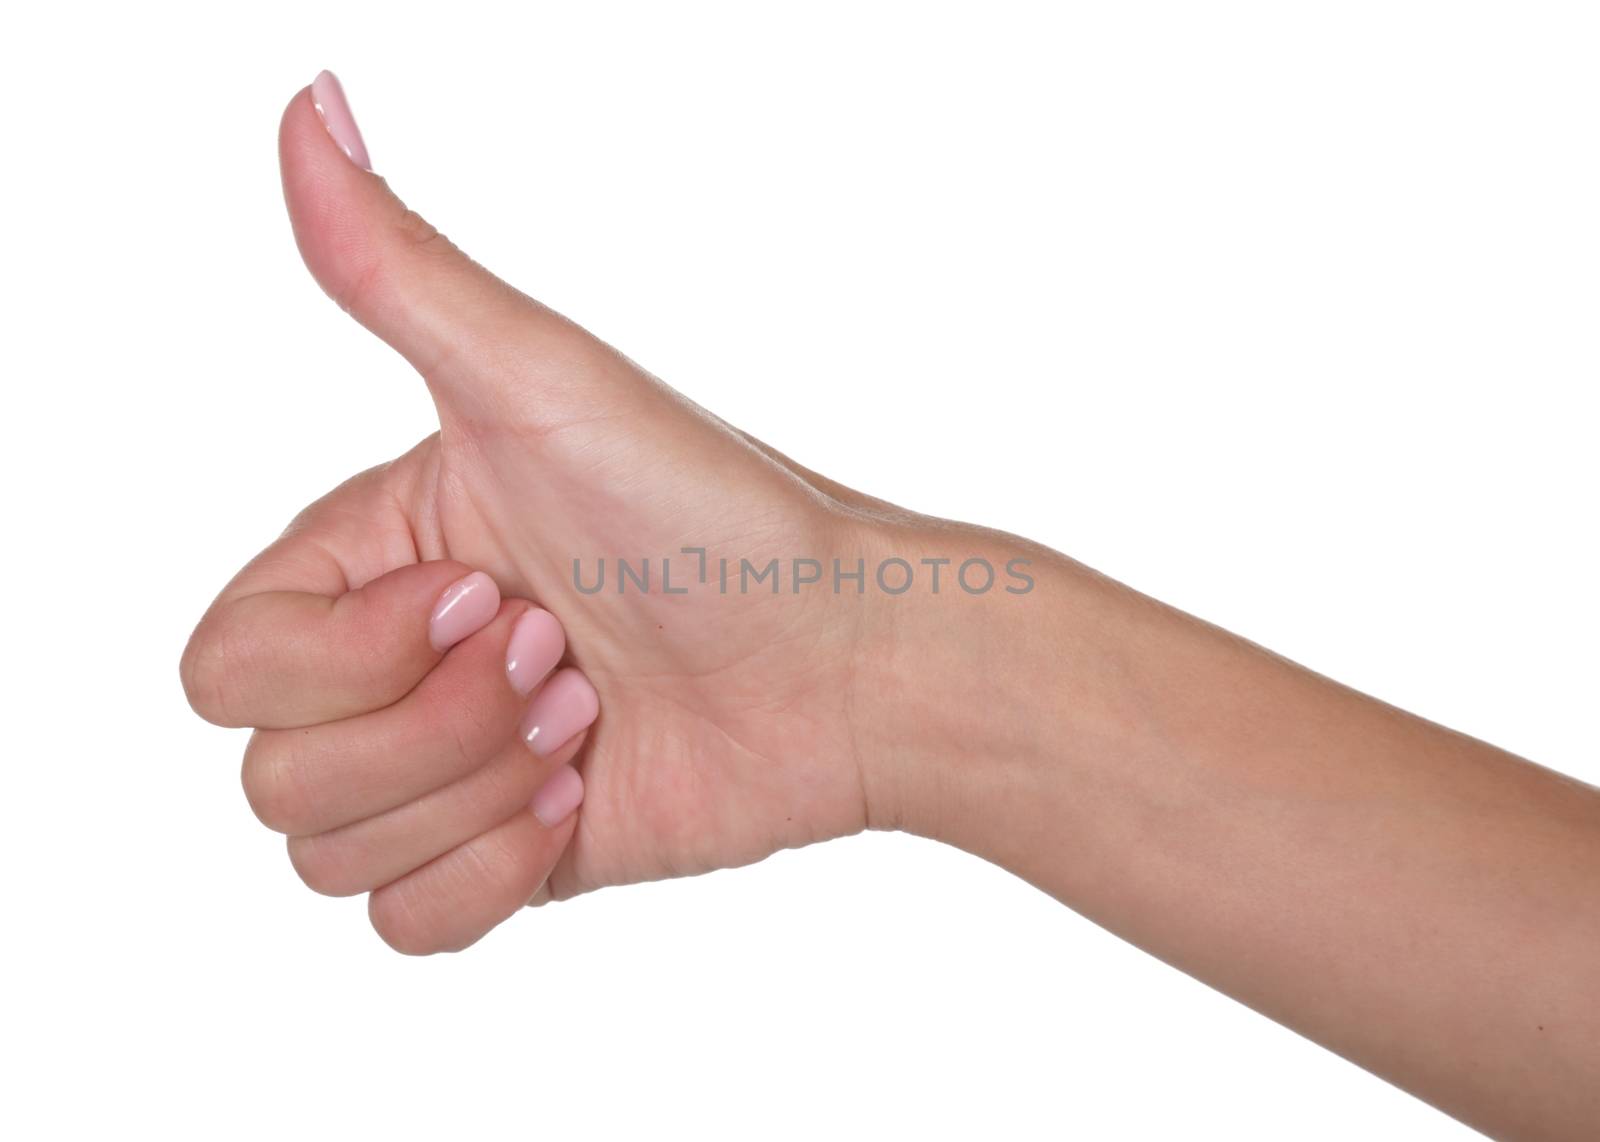 Beuatiful hand showing thumbs up positive gesture